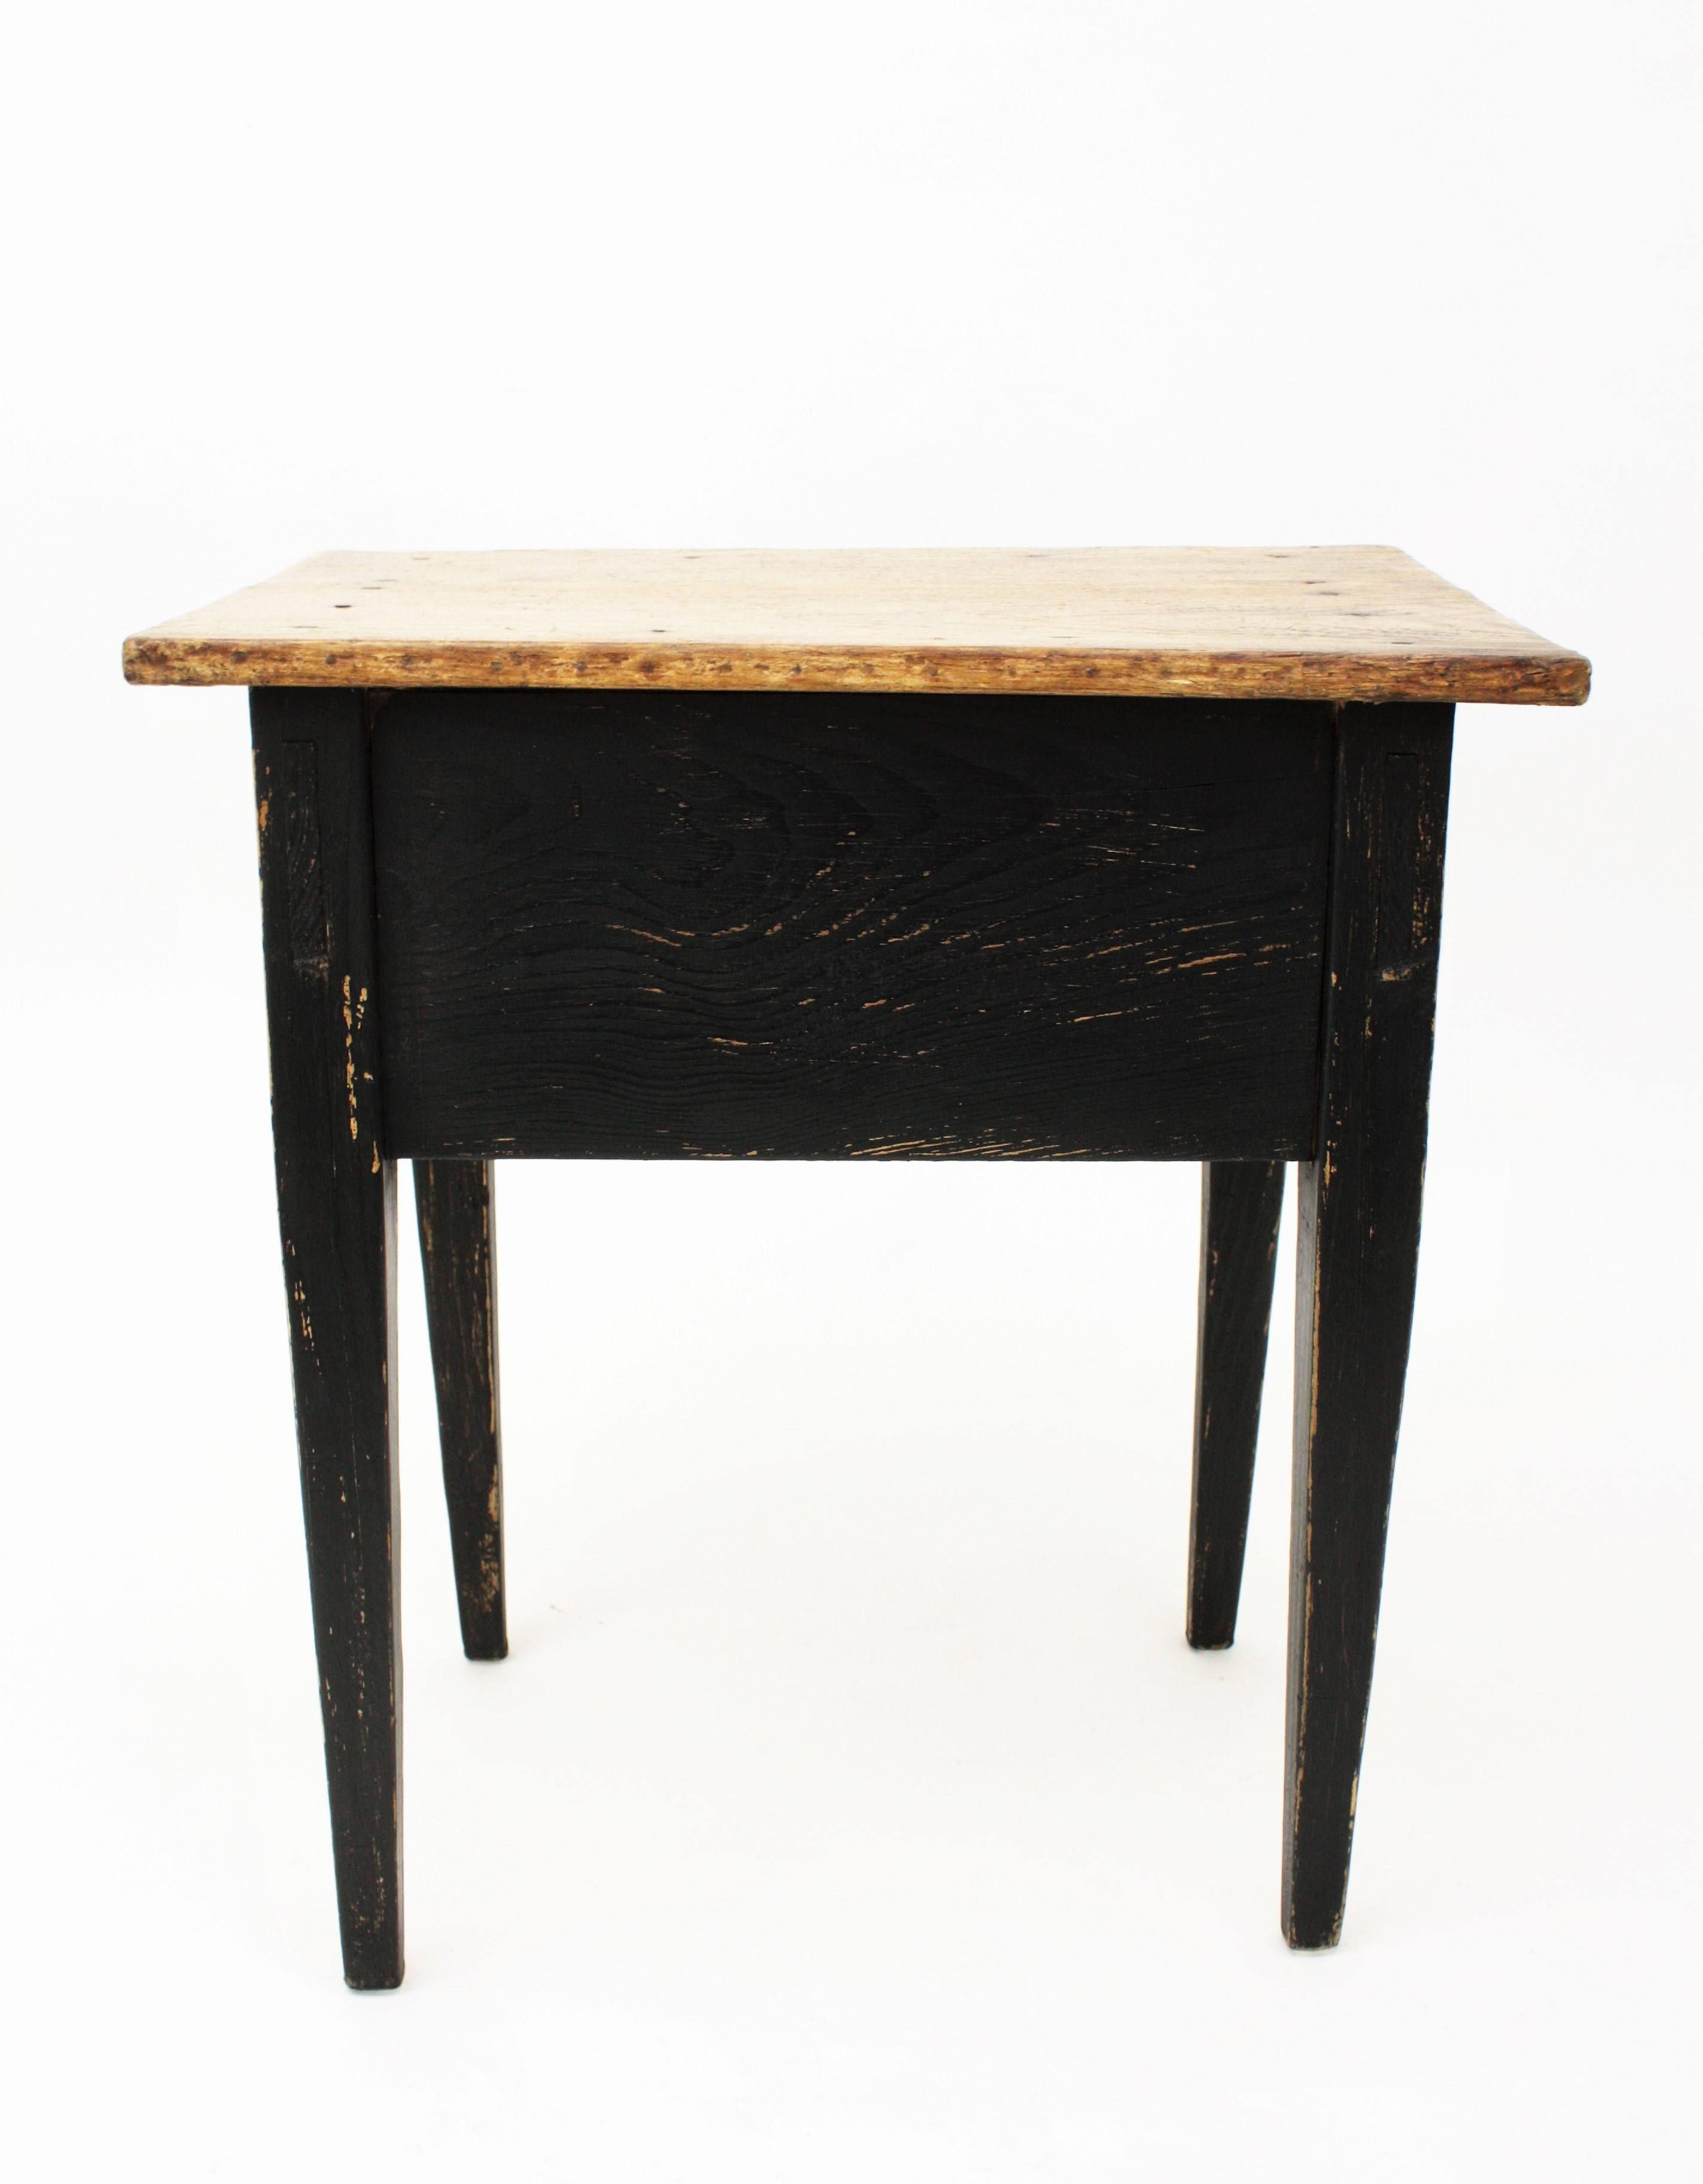 Spanish Single Drawer Rustic Table in Black Patina 1